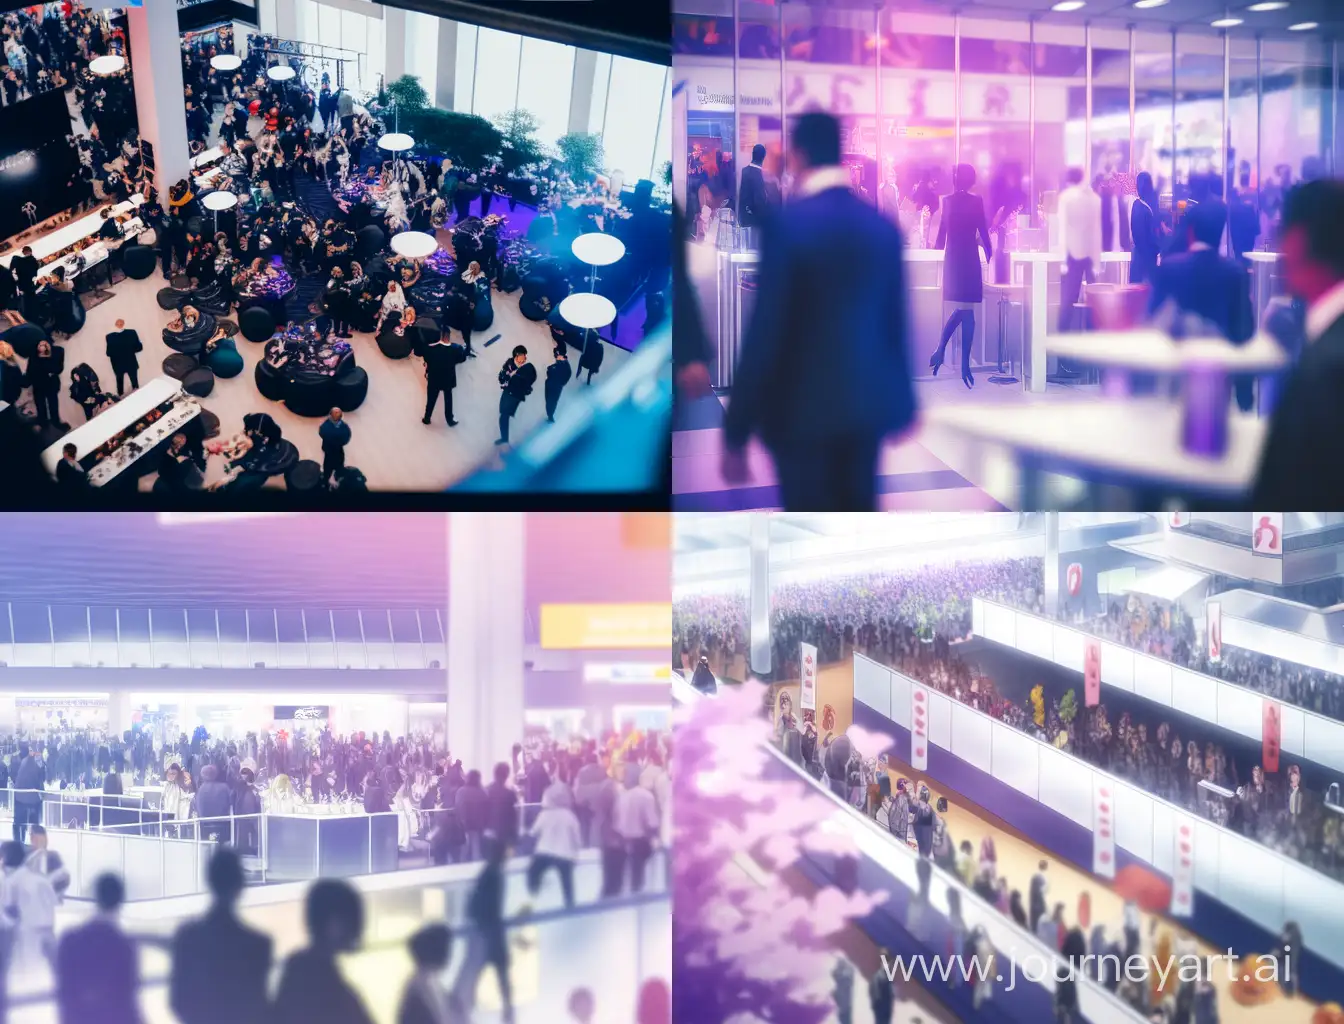 a bussiness exhibition event with many people visible in the blurred background